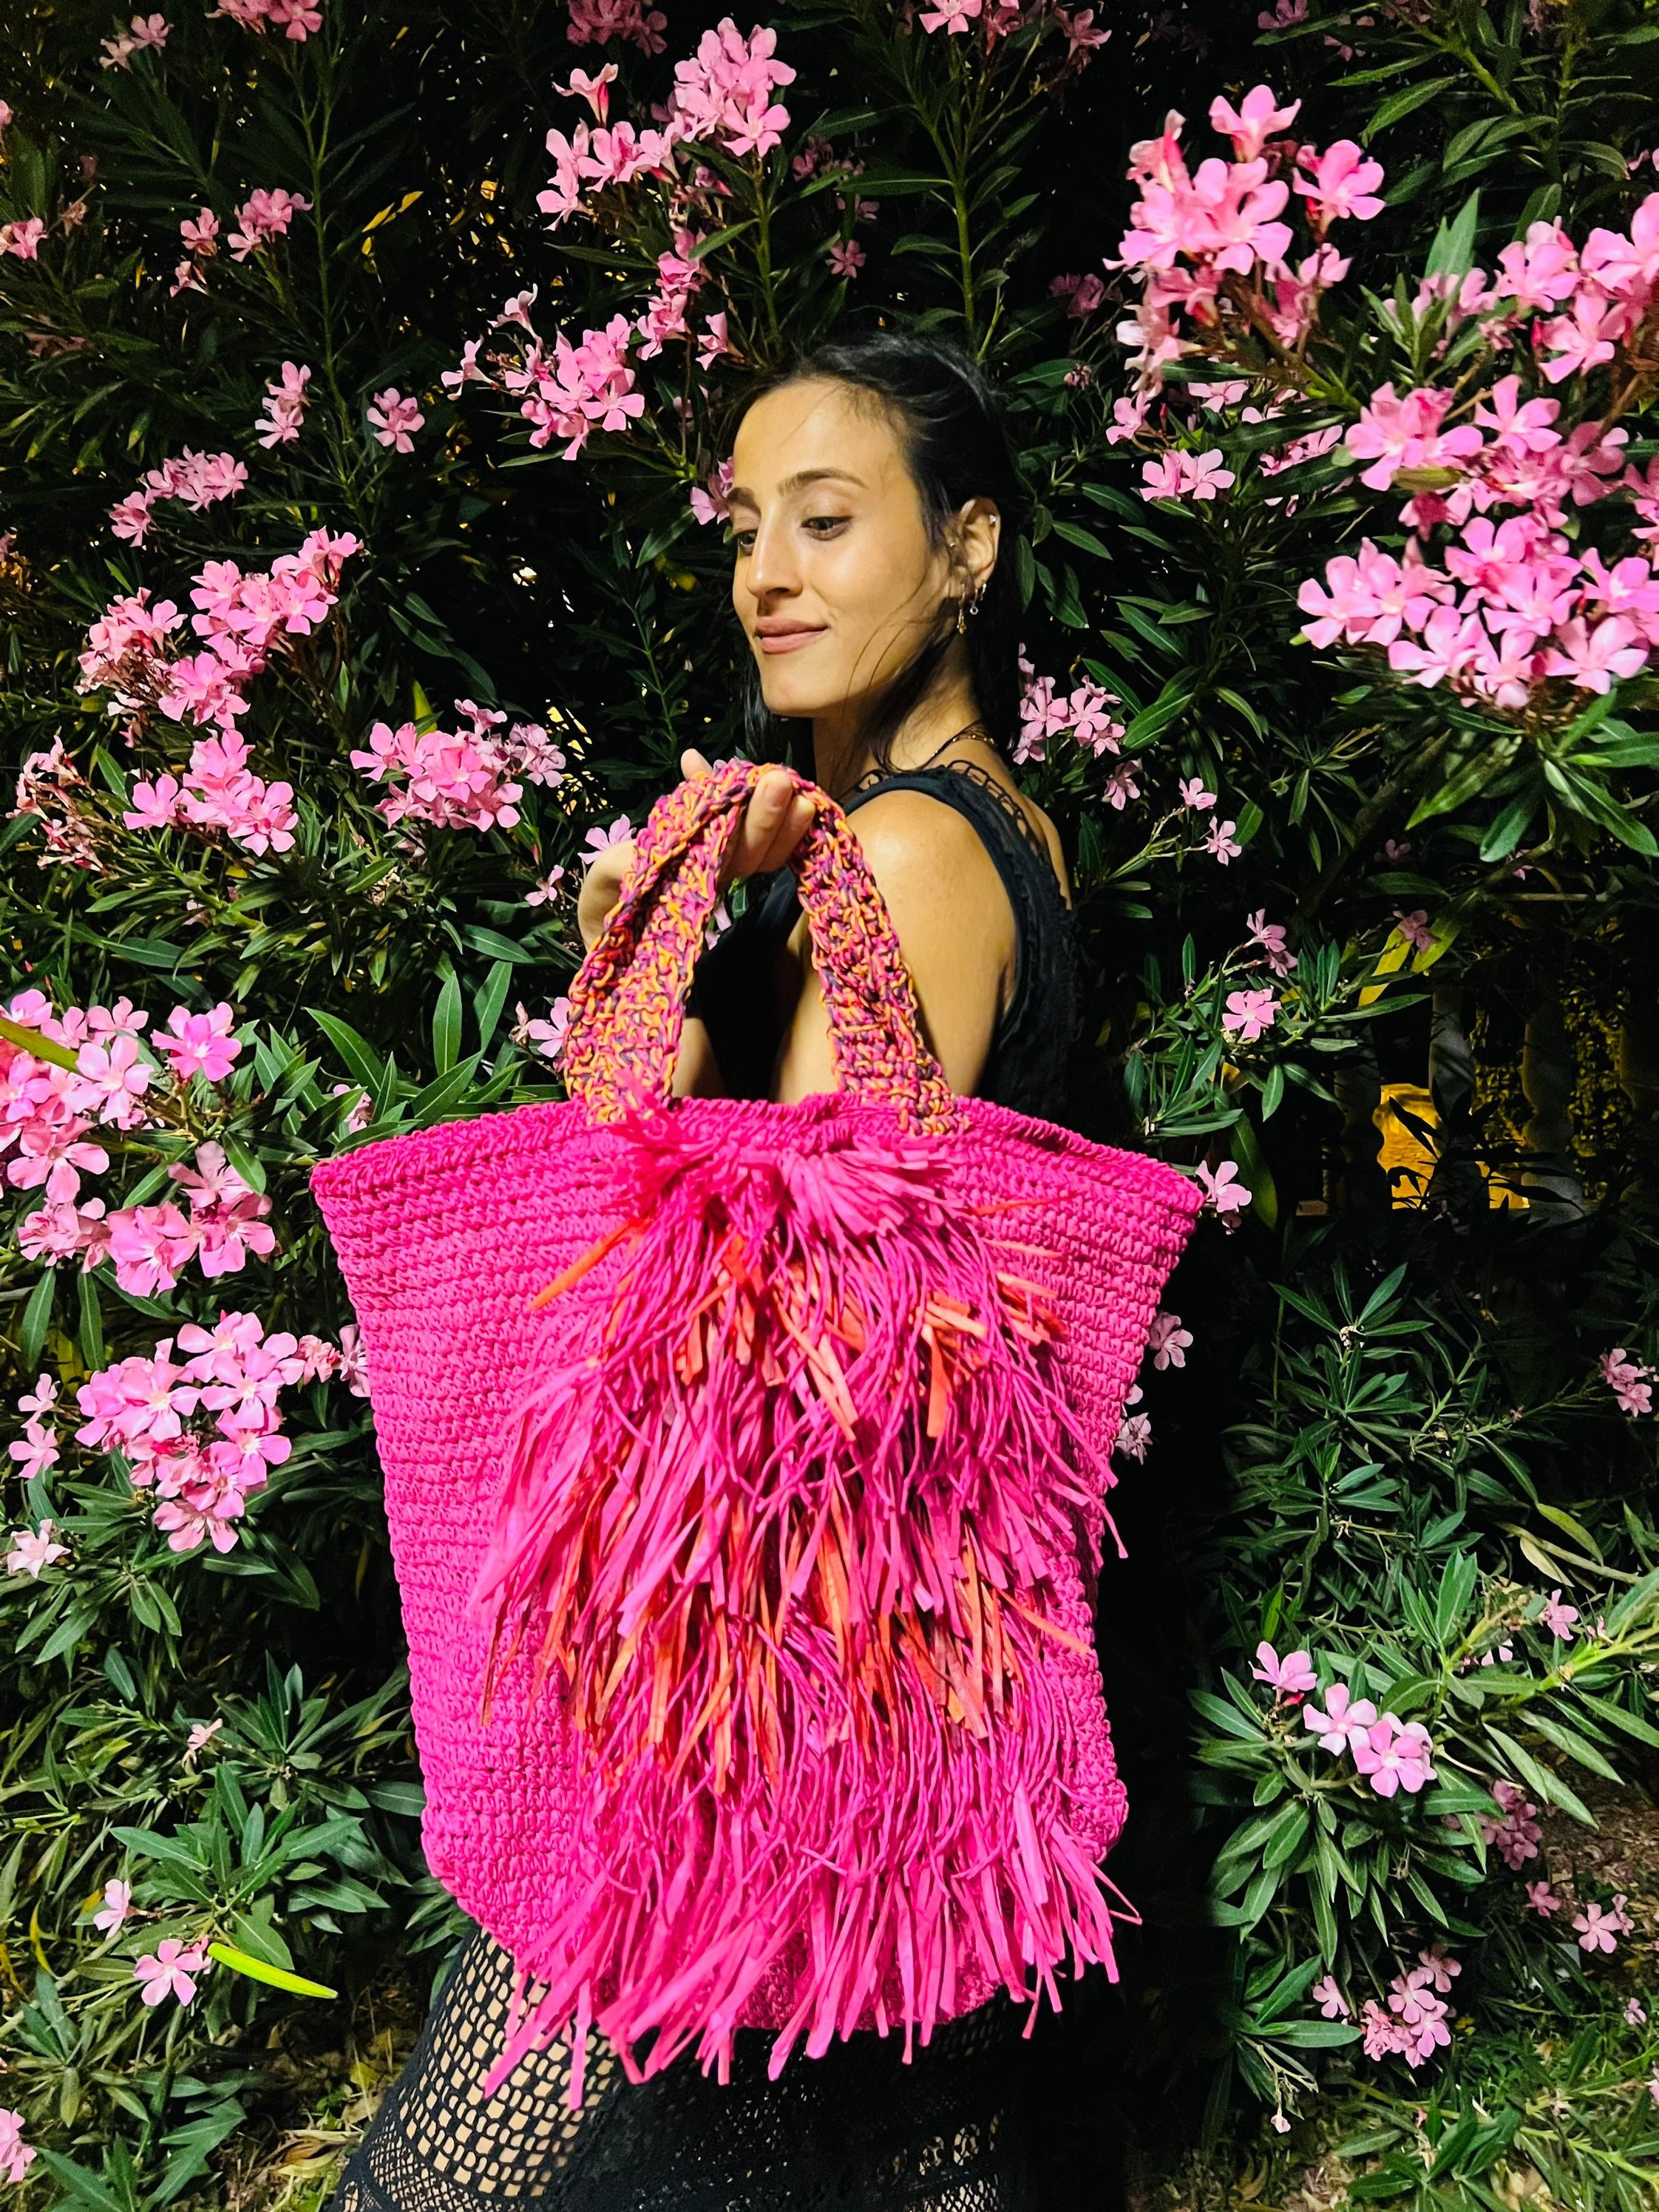 ASOS EDITION extreme fringe bag with natural handle